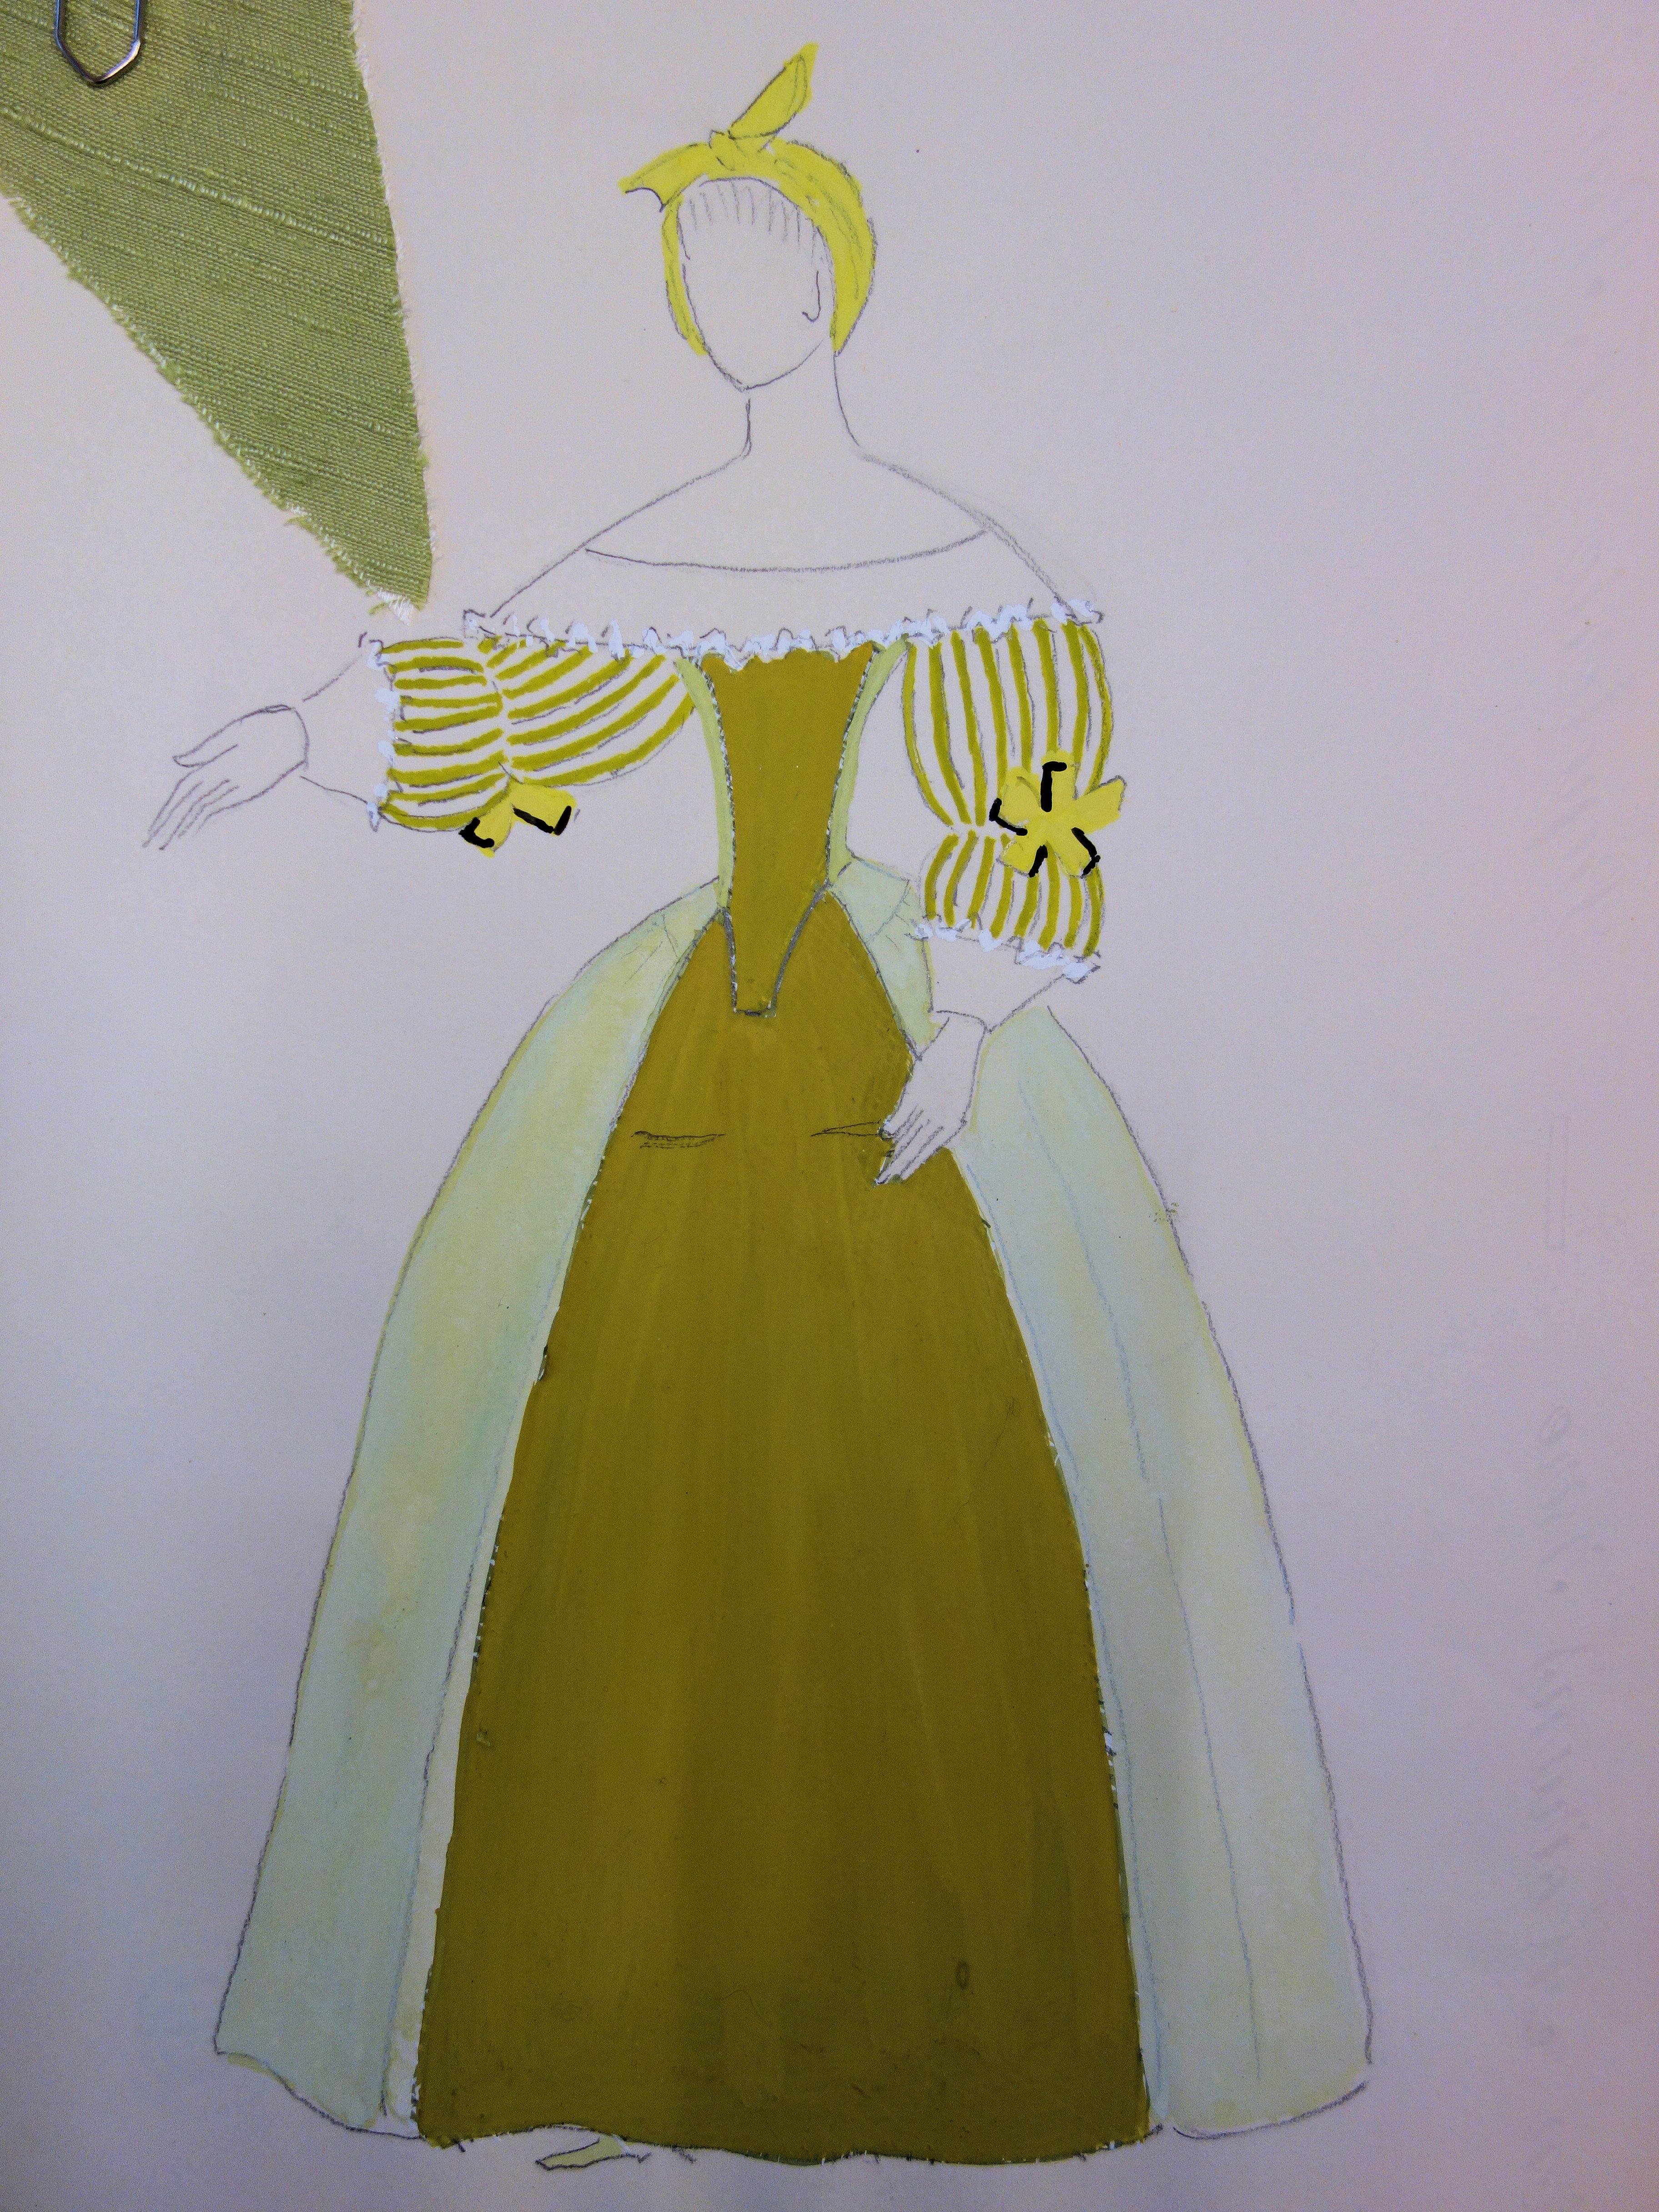 Cinderella Costume - Original signed drawing and watercolor - Art by Suzanne Lalique